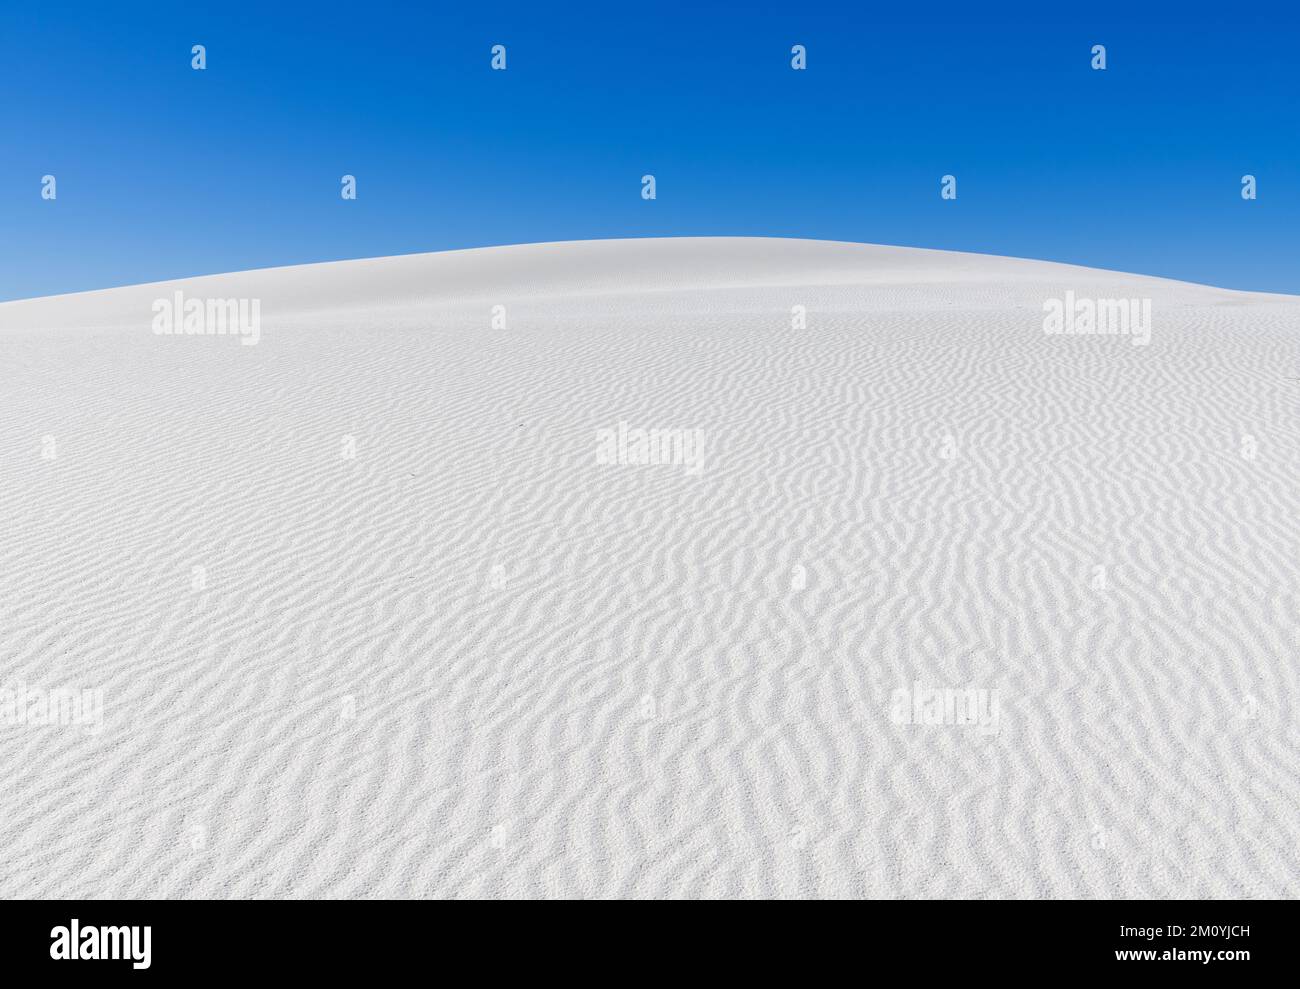 Peaceful scene of rounded white sand dune with abstract patterns in White Sands National Park, New Mexico Stock Photo